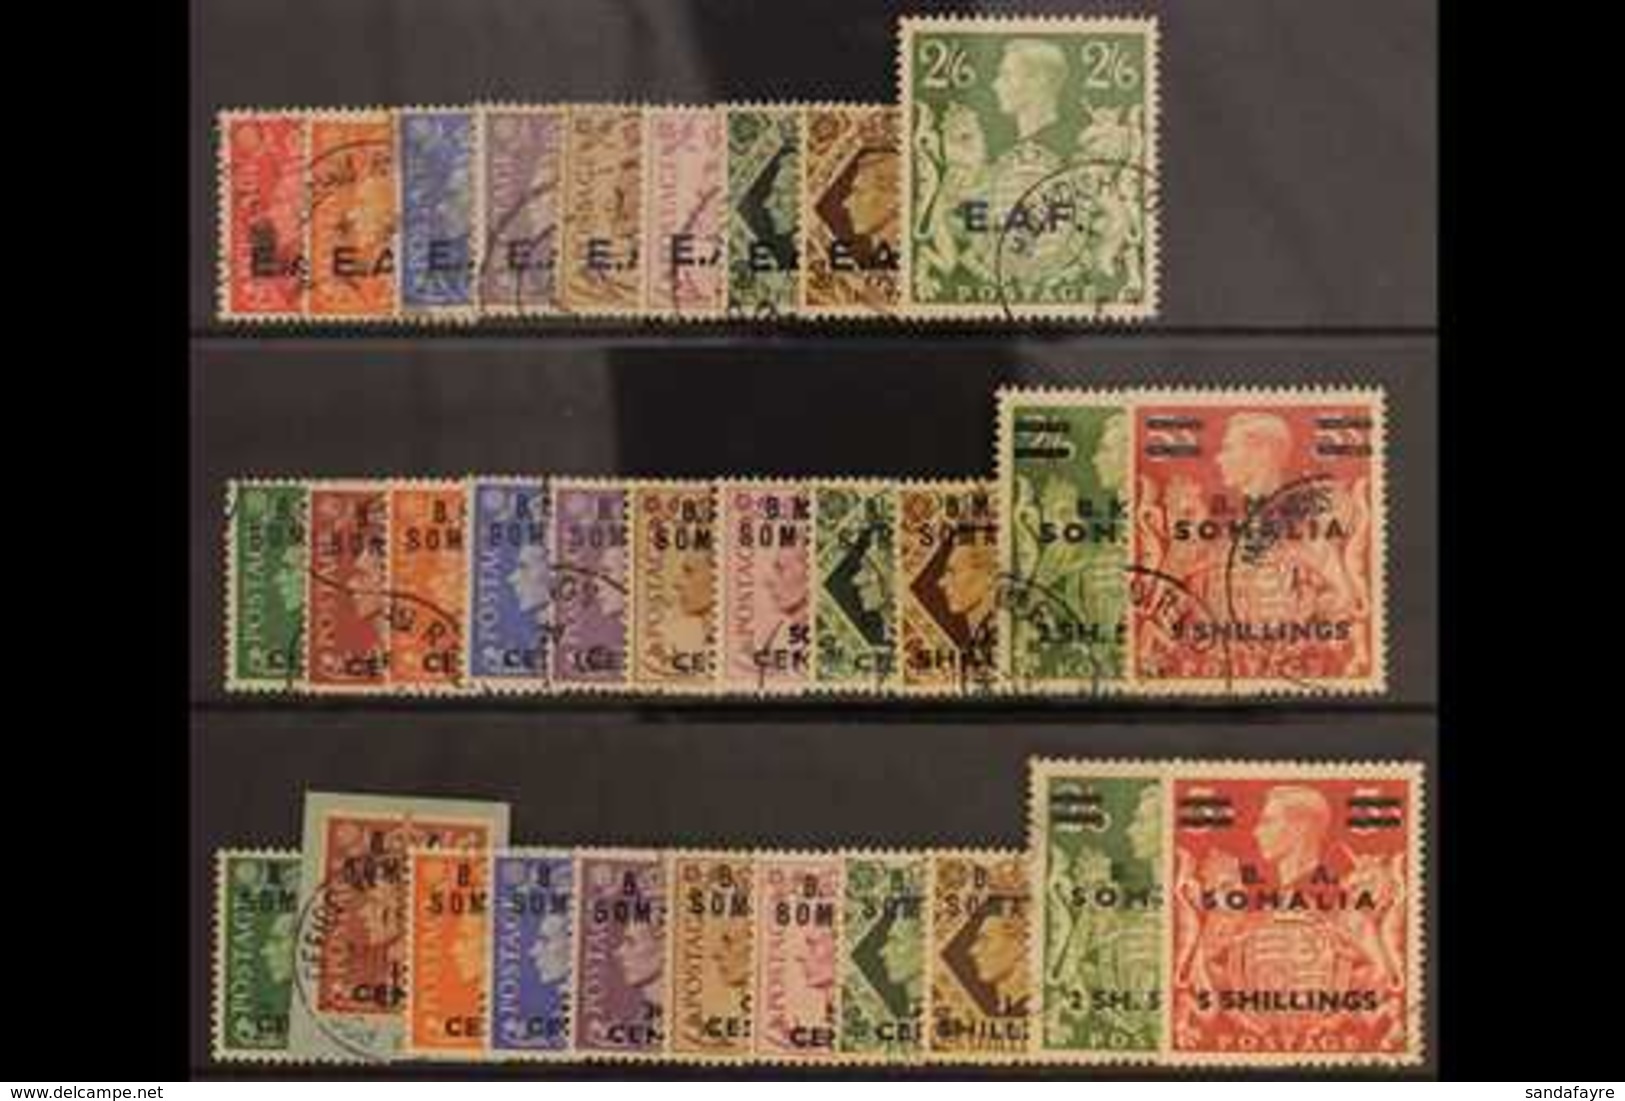 SOMALIA 1943 - 50 Complete Used Issues, SG S1/31, Fine To Very Fine Used. (31 Stamps) For More Images, Please Visit Http - Africa Orientale Italiana